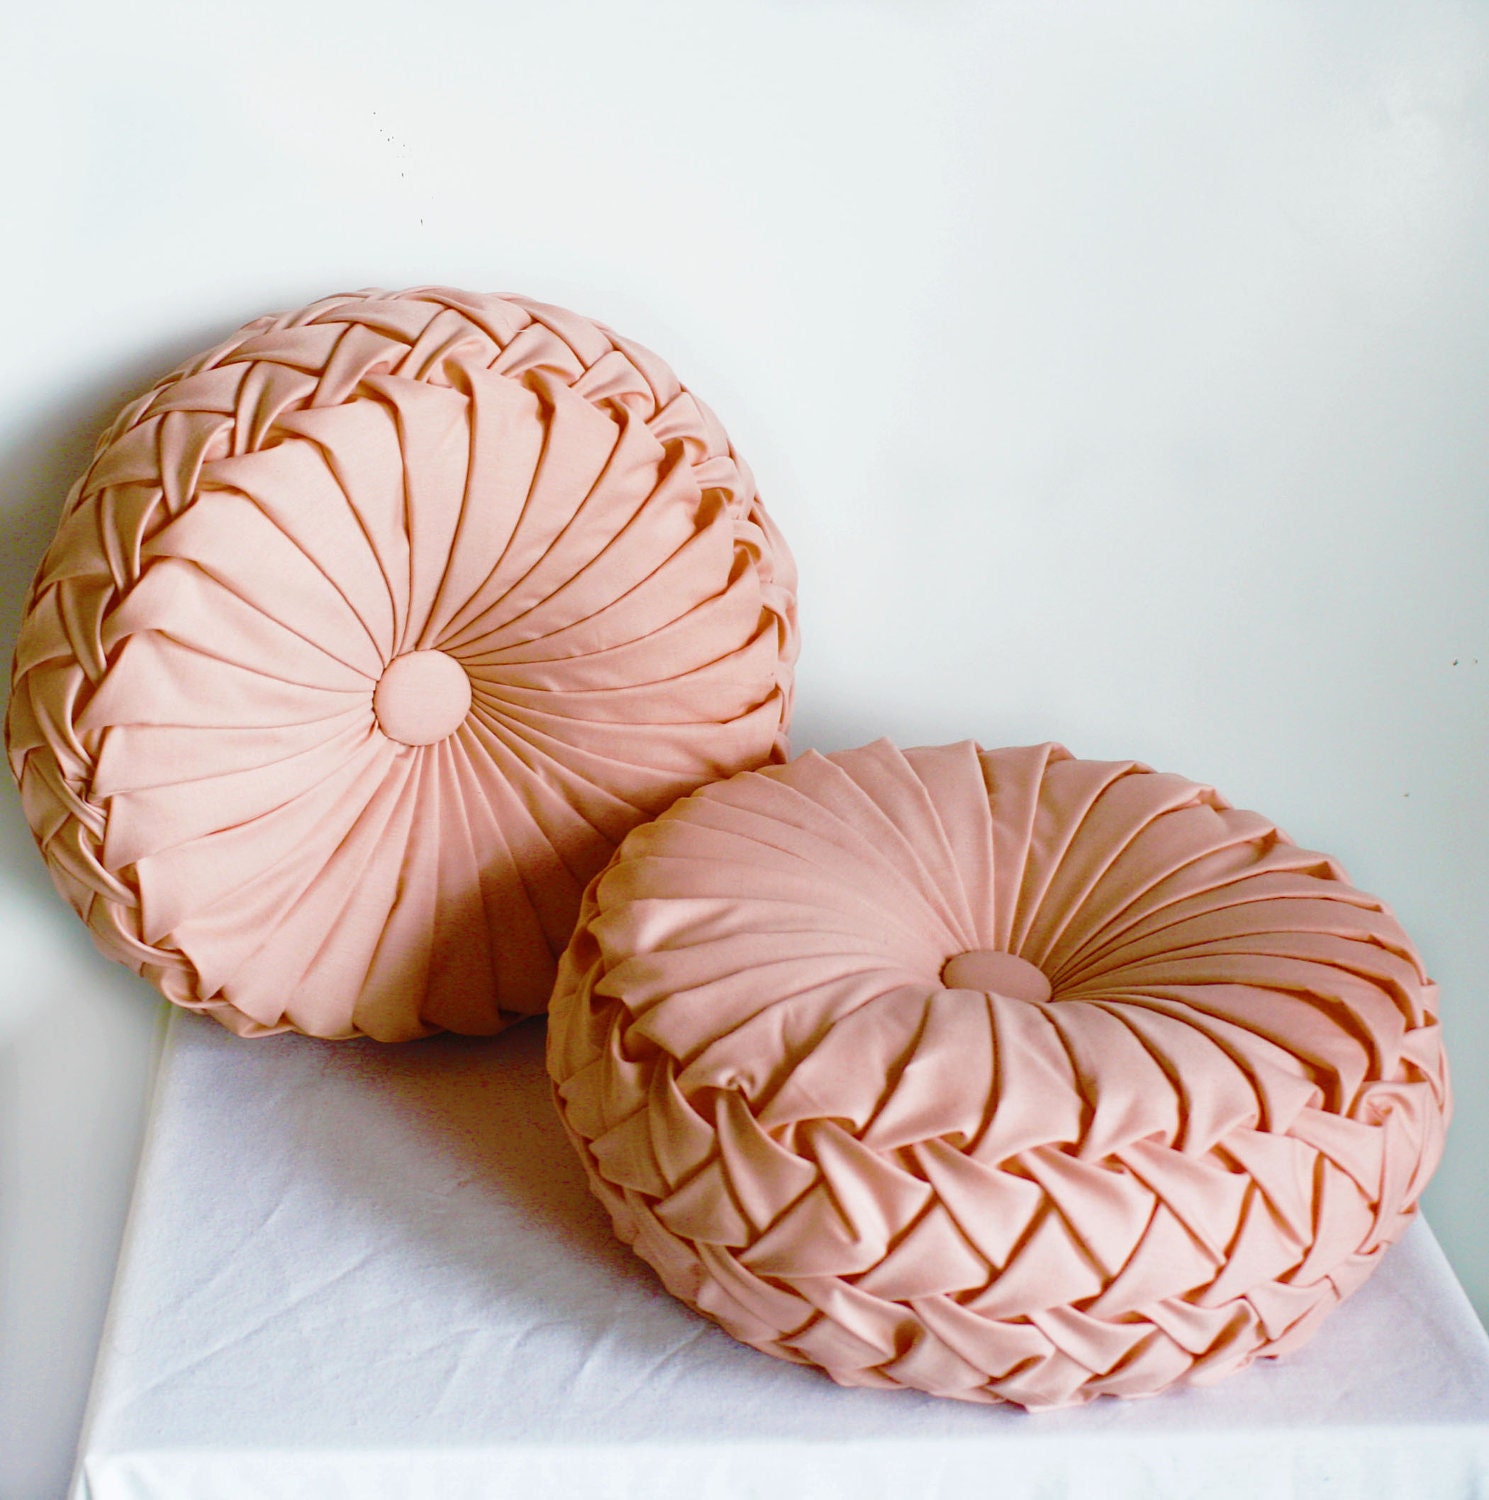 Made-to-Order 1960s Vintage Inspired Round Smocked Decorative Pillows Peach Bridal Satin